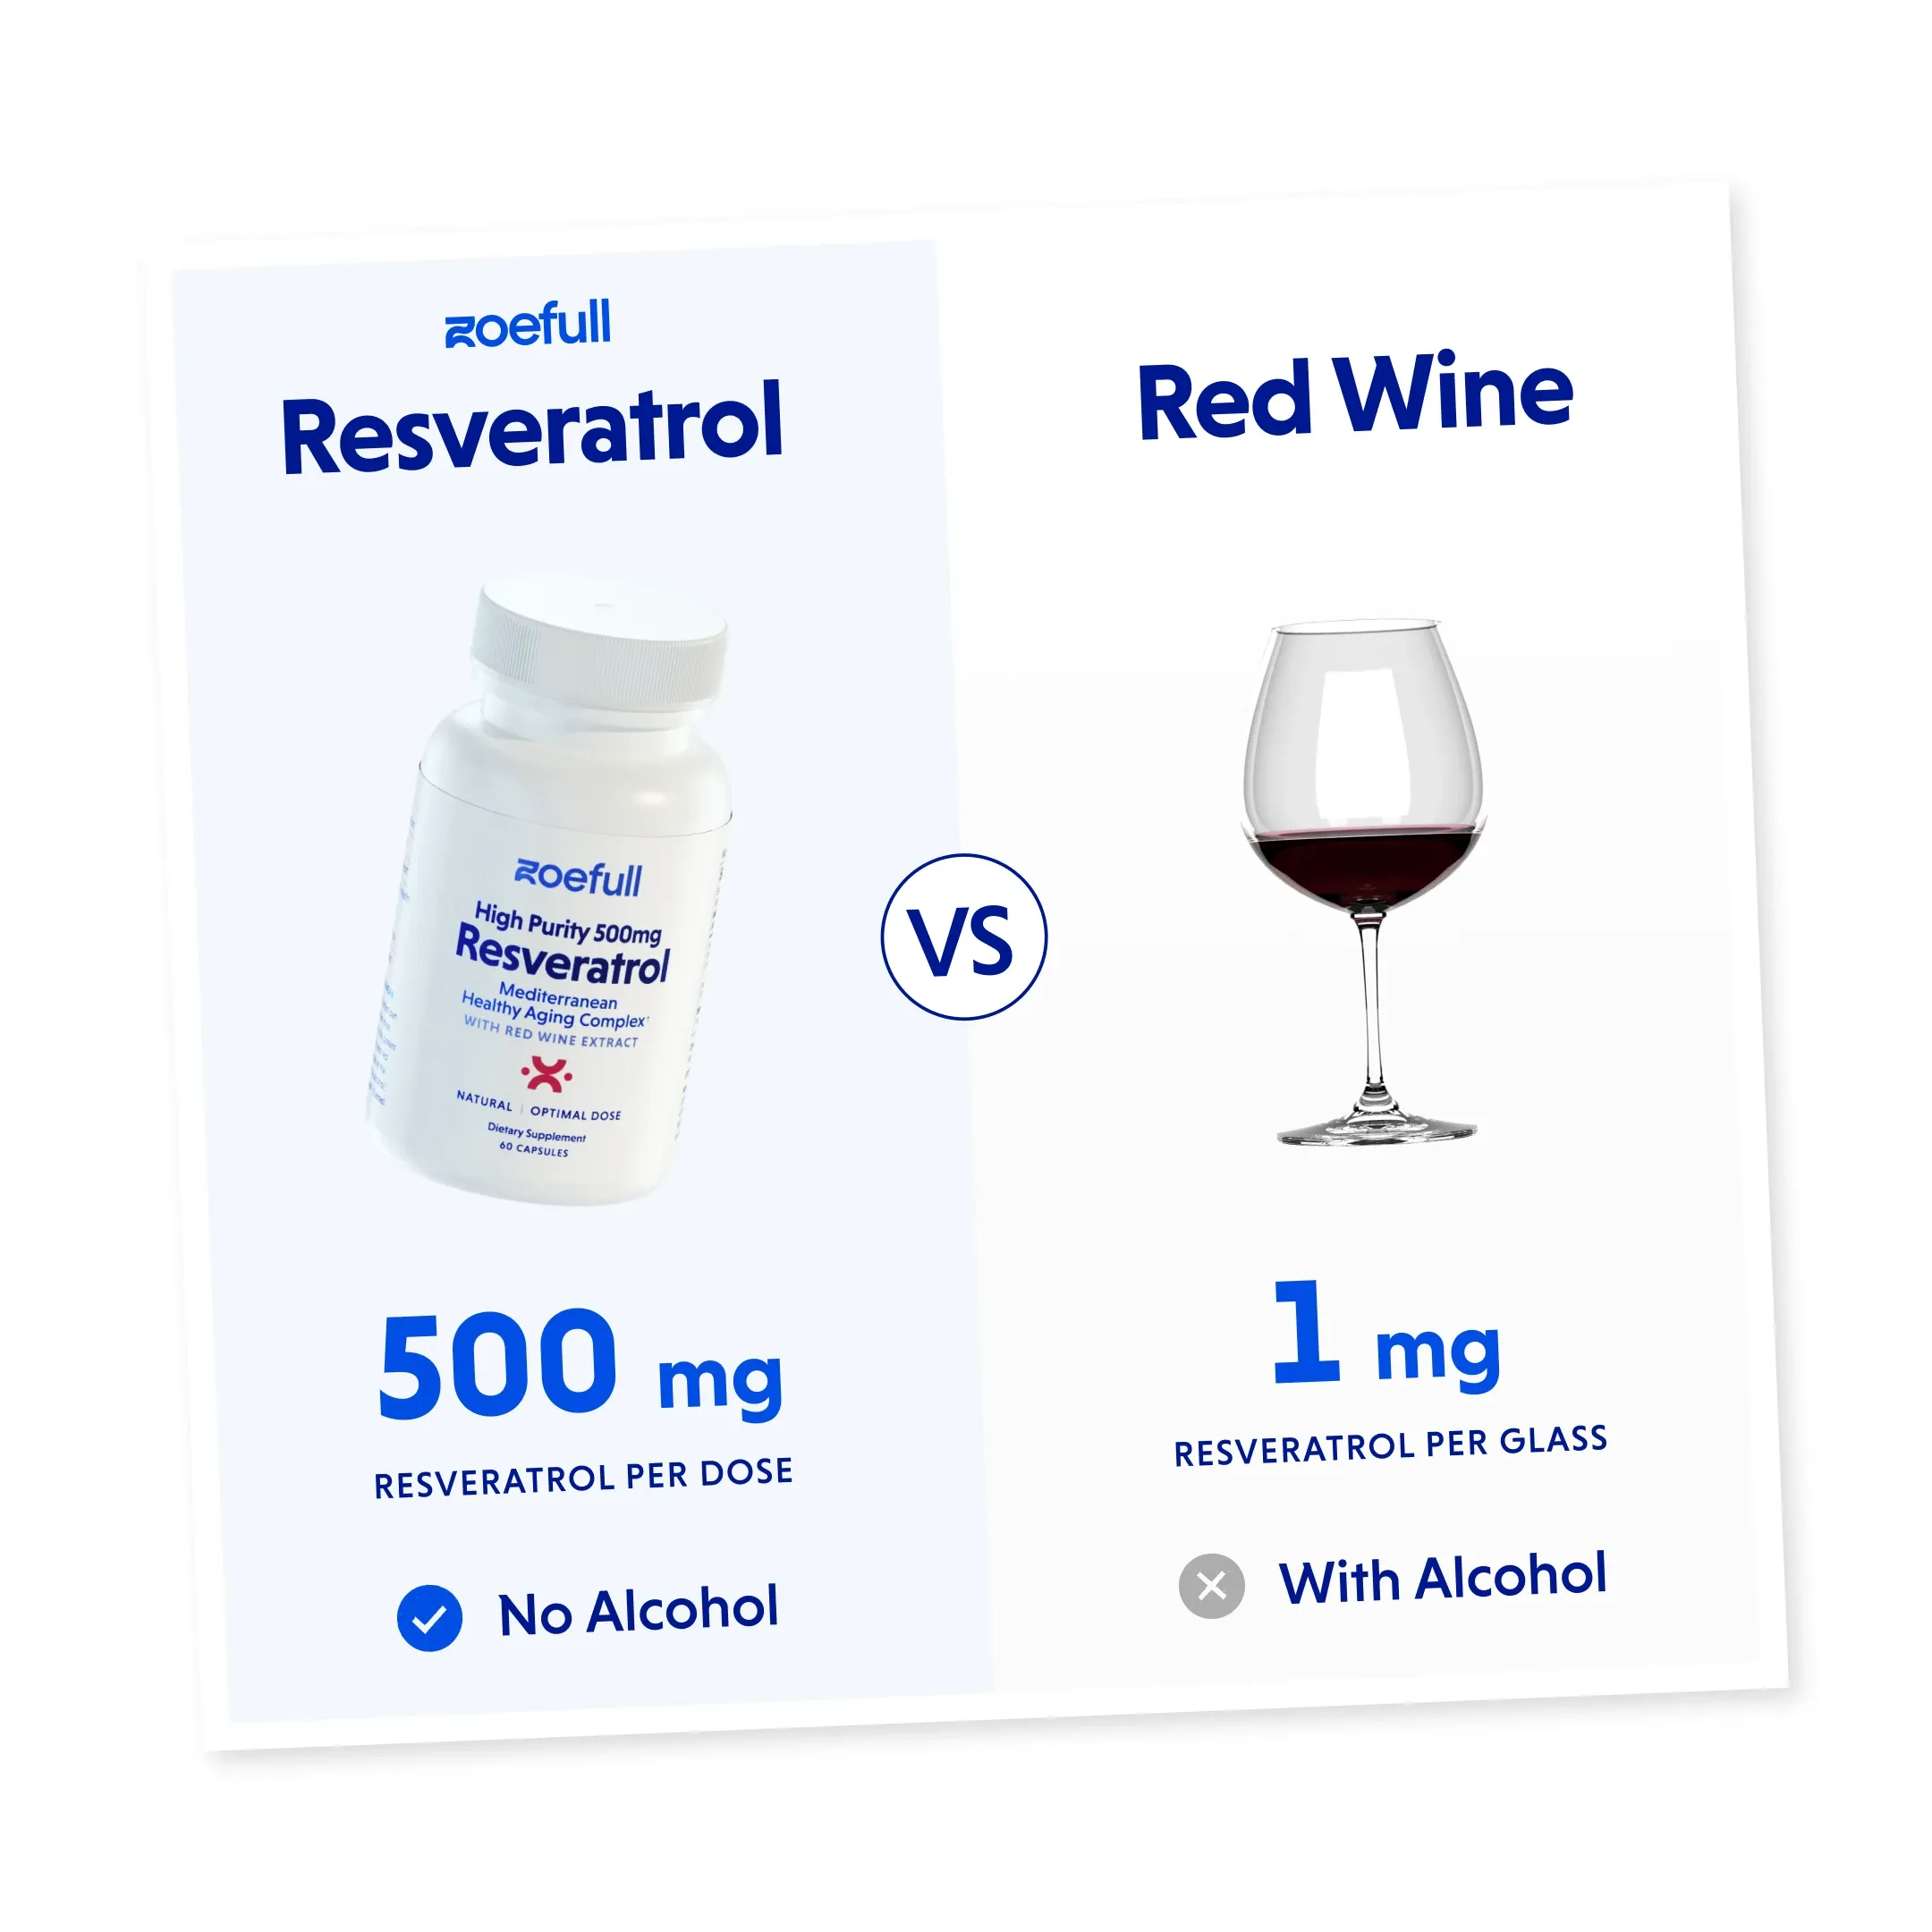 Comparison image comparing a dose of zoefull's resveratrol capsule supplement with a glass of red wine that also contains resveratrol. With zoefull you get 500mg and with a glass of read wine 1mg.